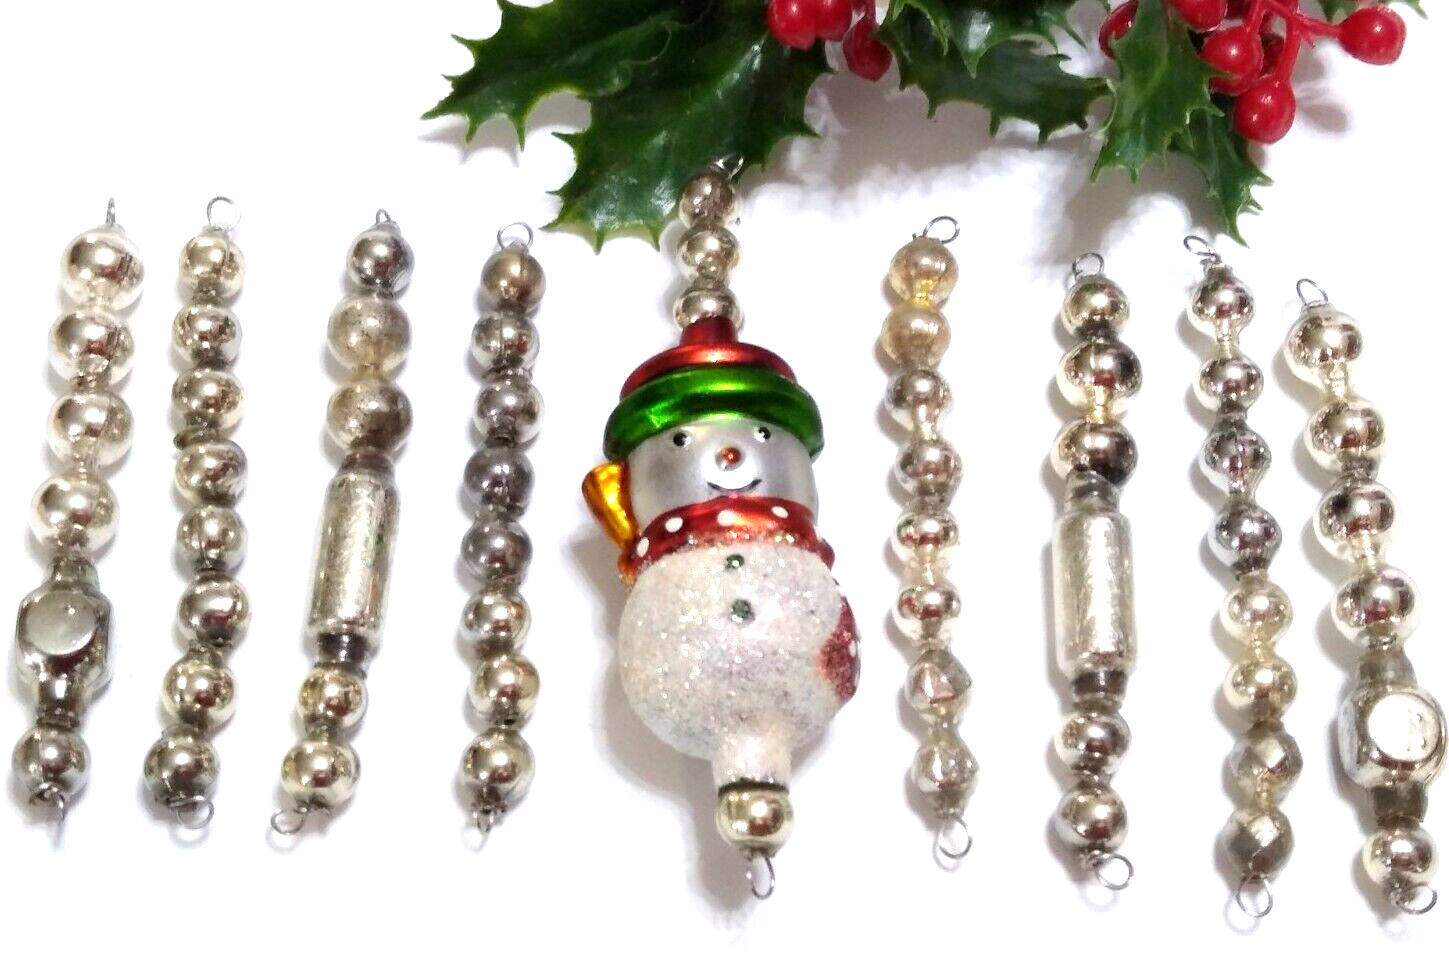 Vtg Christmas Ornaments Mercury Glass Bead Icicle lot of 9 SNOWMAN Silver #27